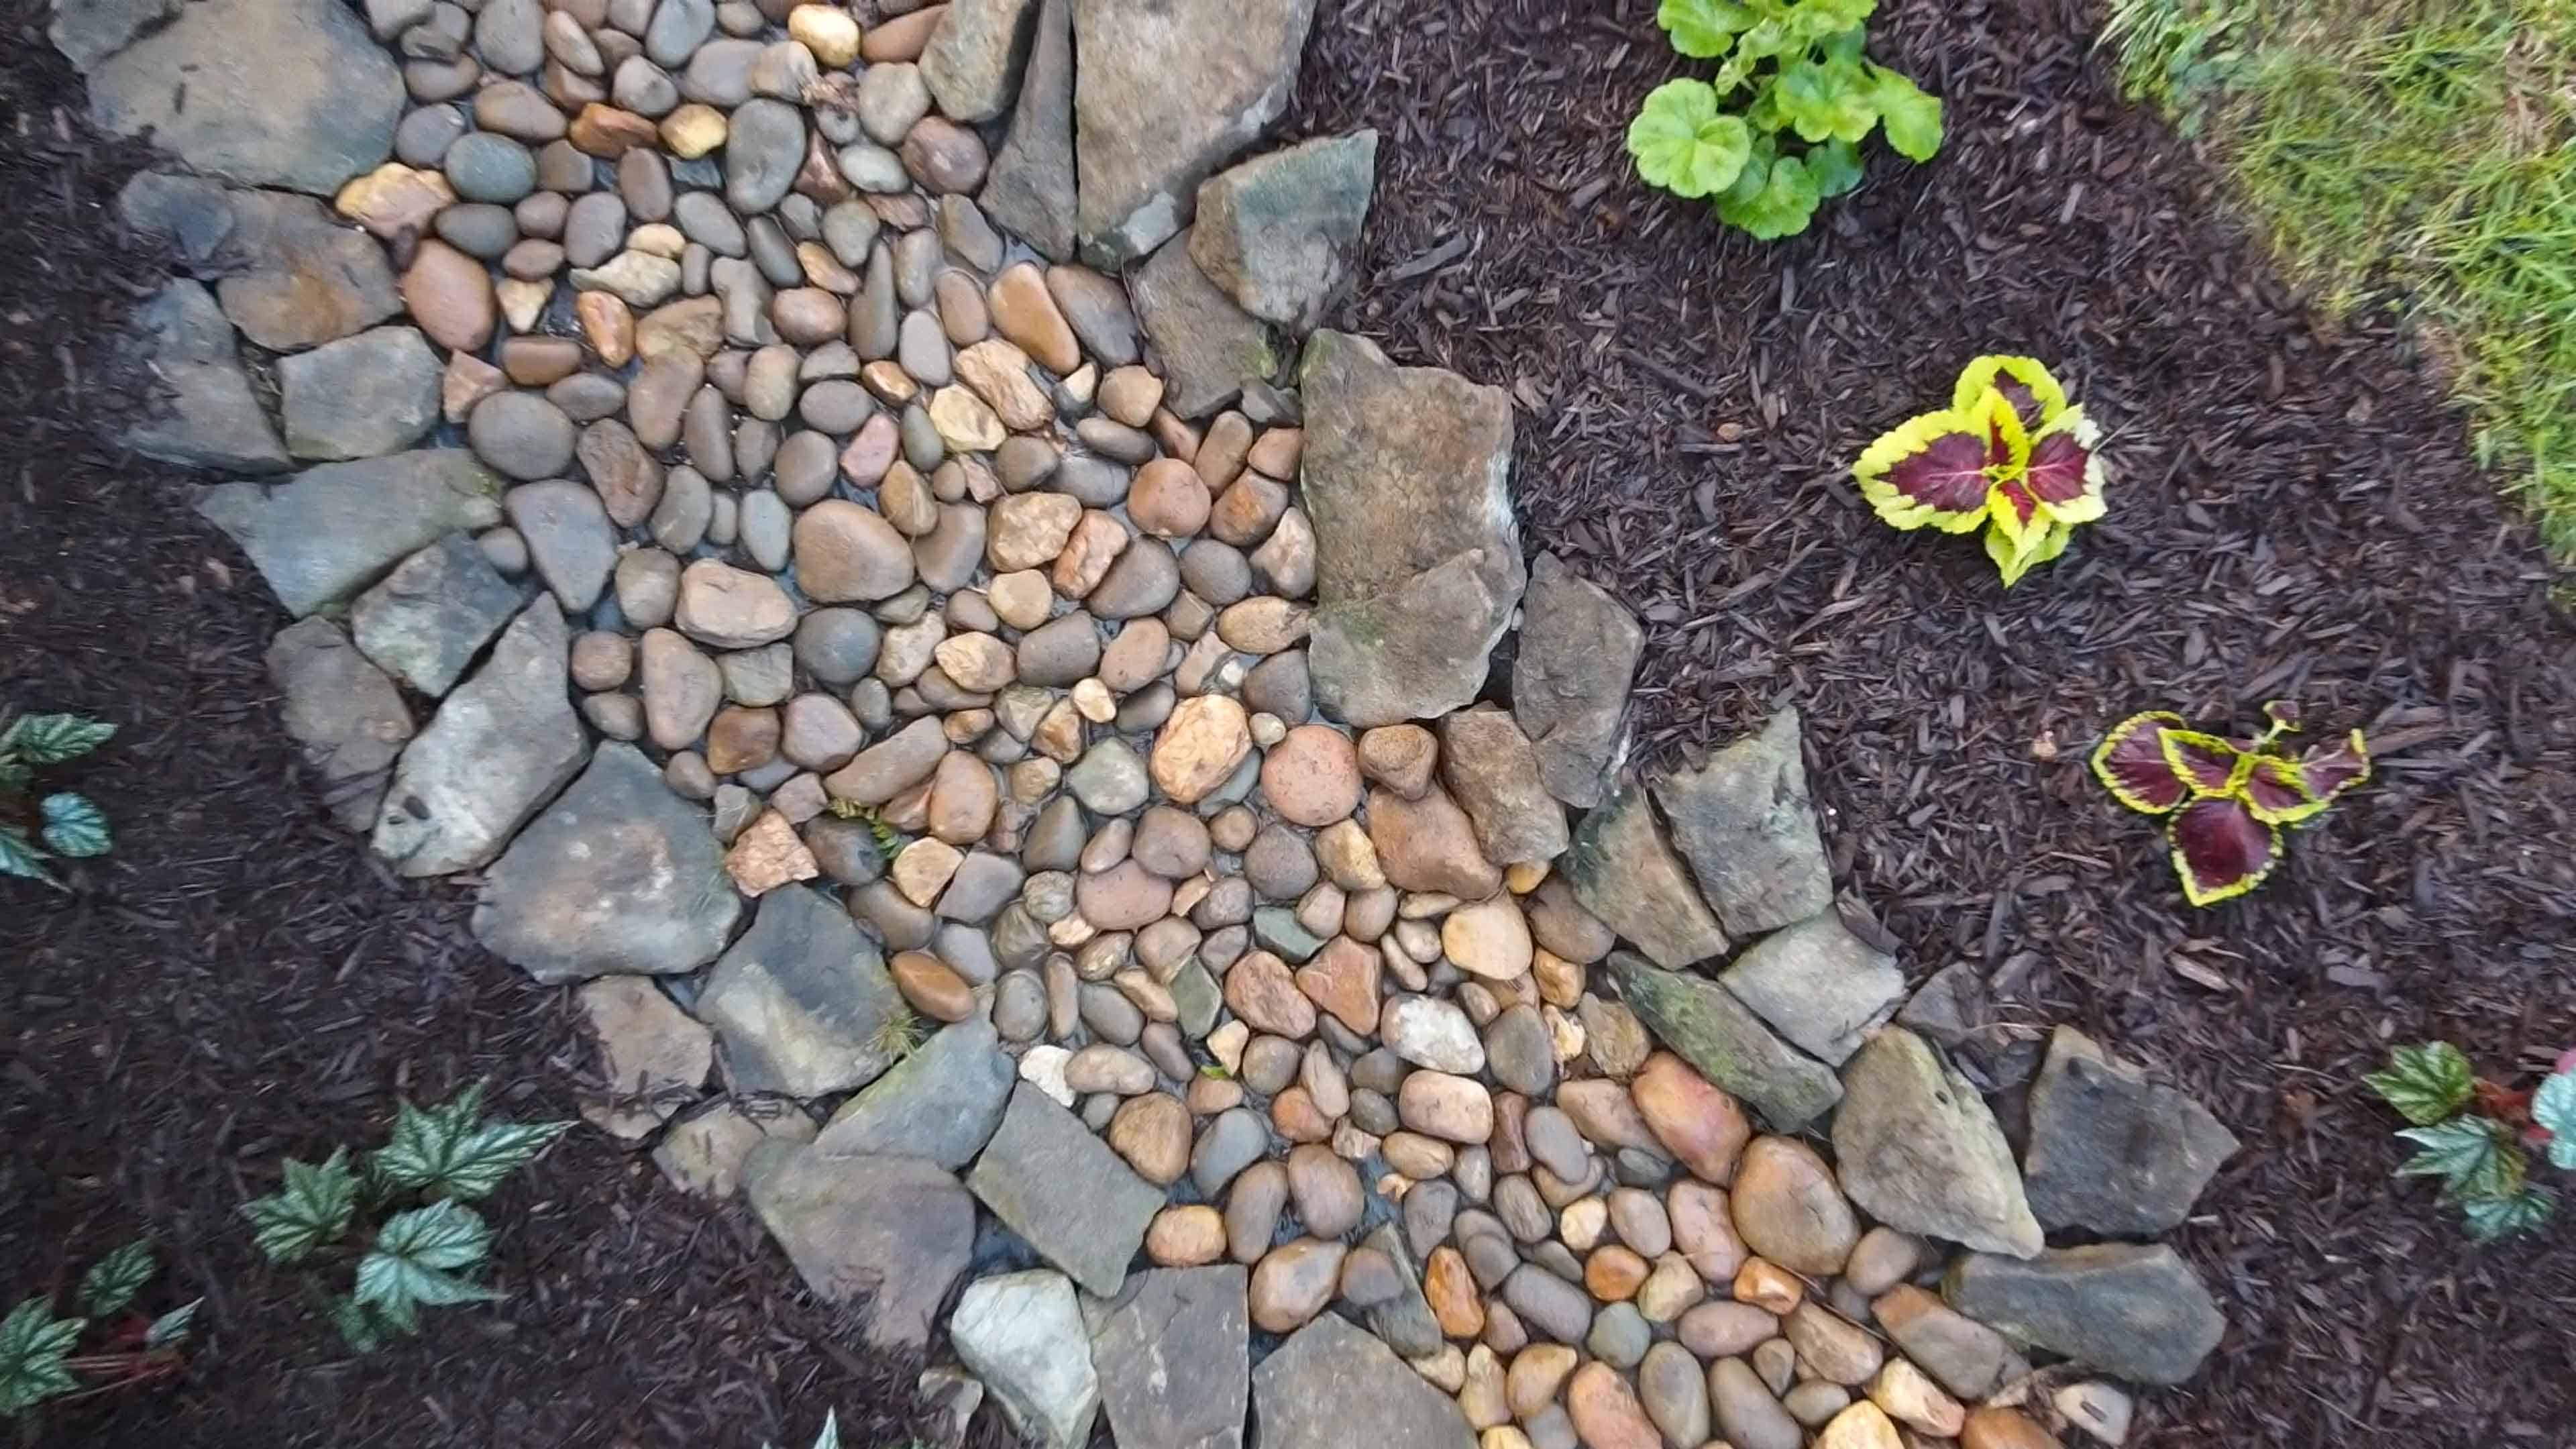 IdeaMulch and River rock with mulched beds creates a natural edging look